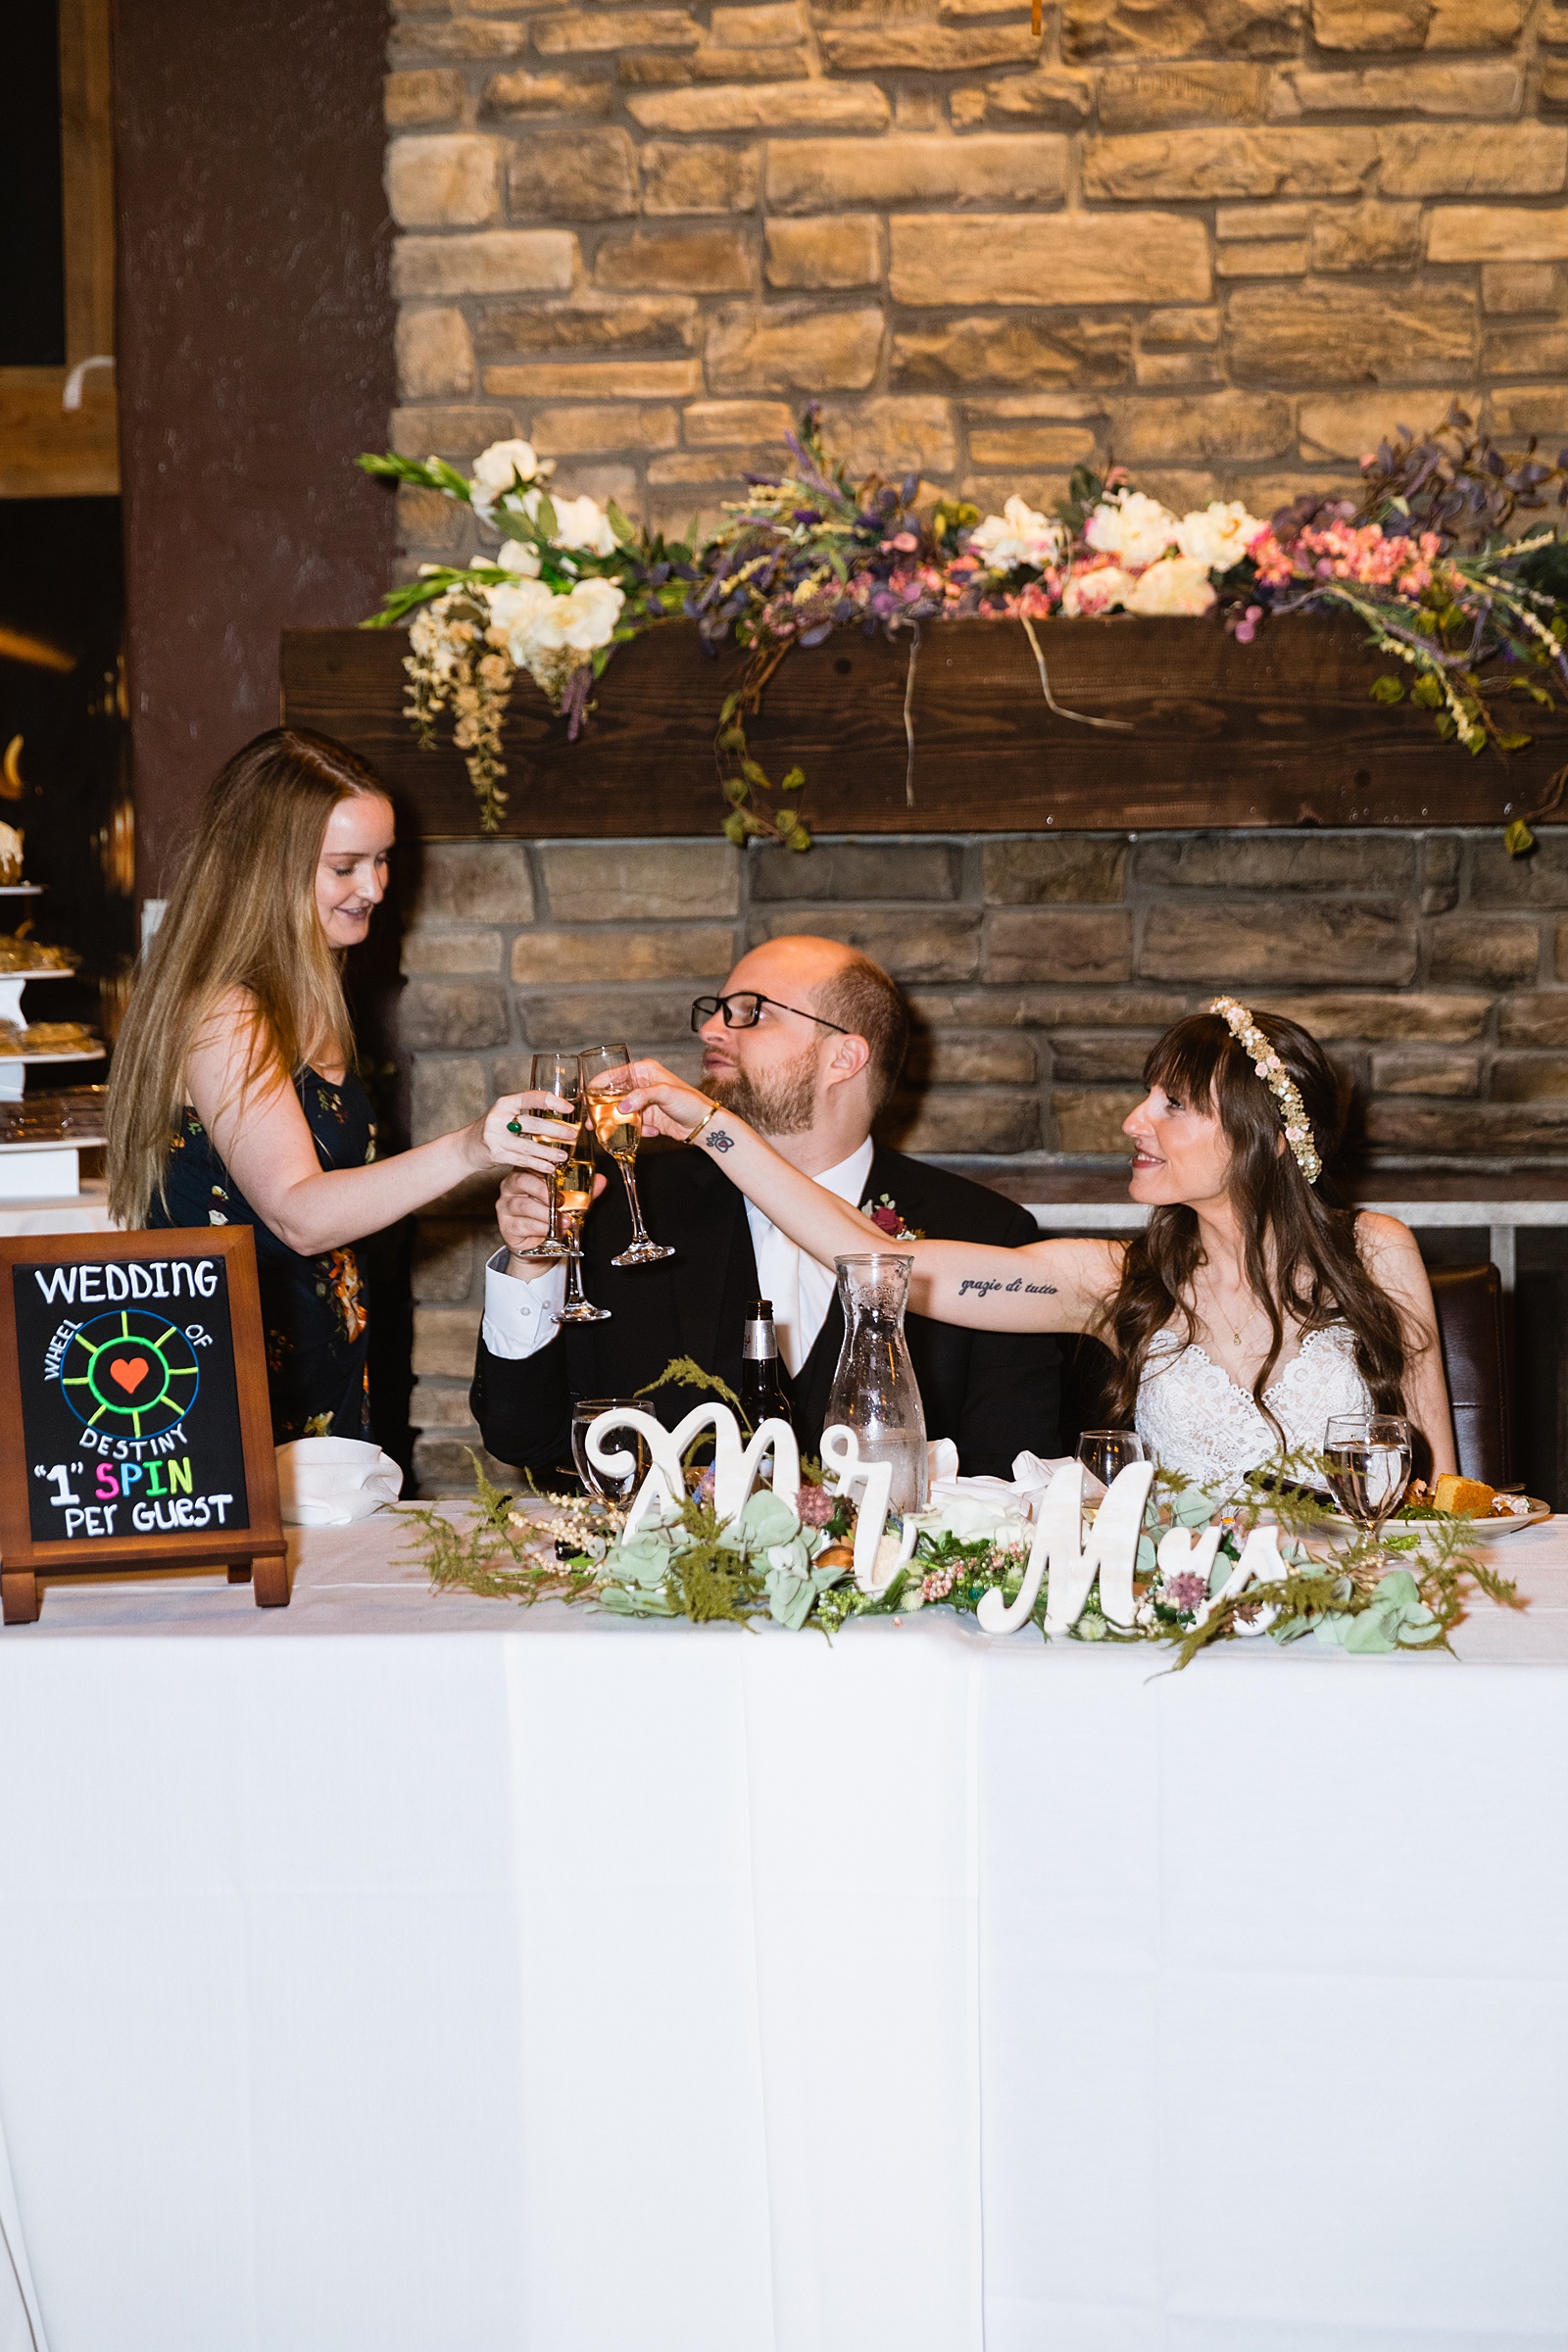 Bride and Groom share a toast with their guests at their Timo Wood Oven Wine Bar wedding reception by Arizona wedding photographer PMA Photography.